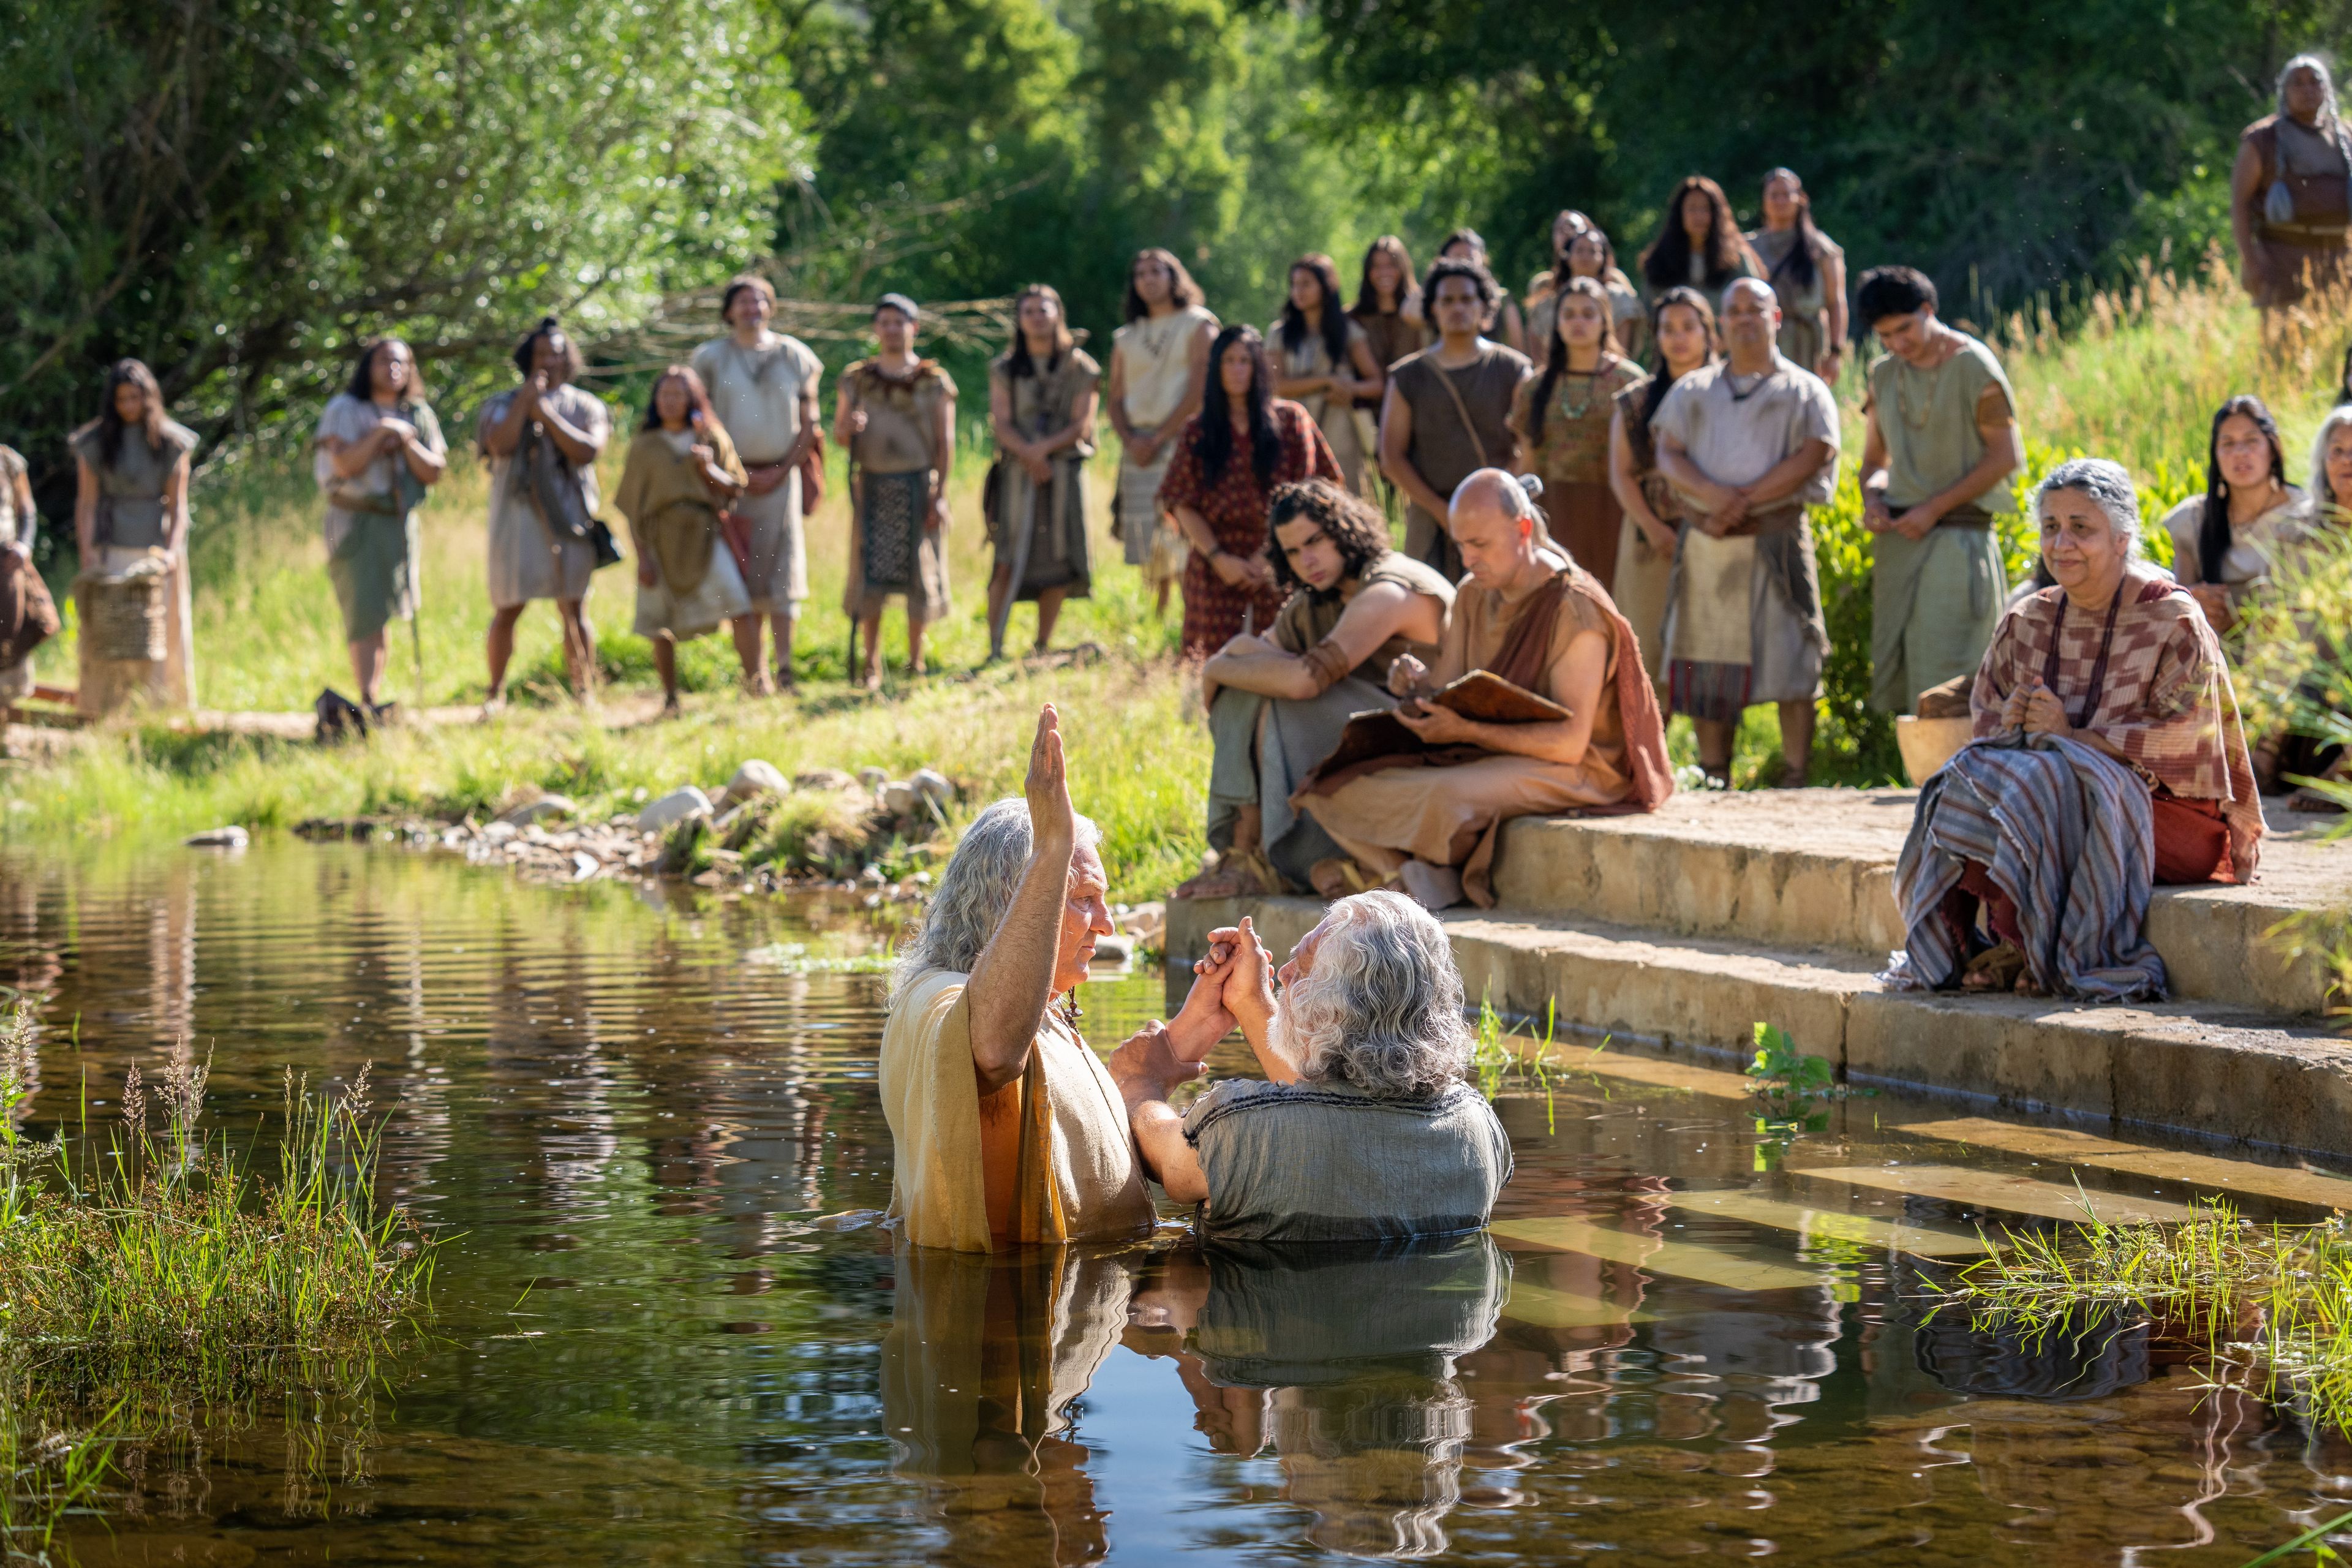 Nephi, son of Nephi, baptizes other Nephites in a river. Others (including Timothy) stand at the water's edge and watch.